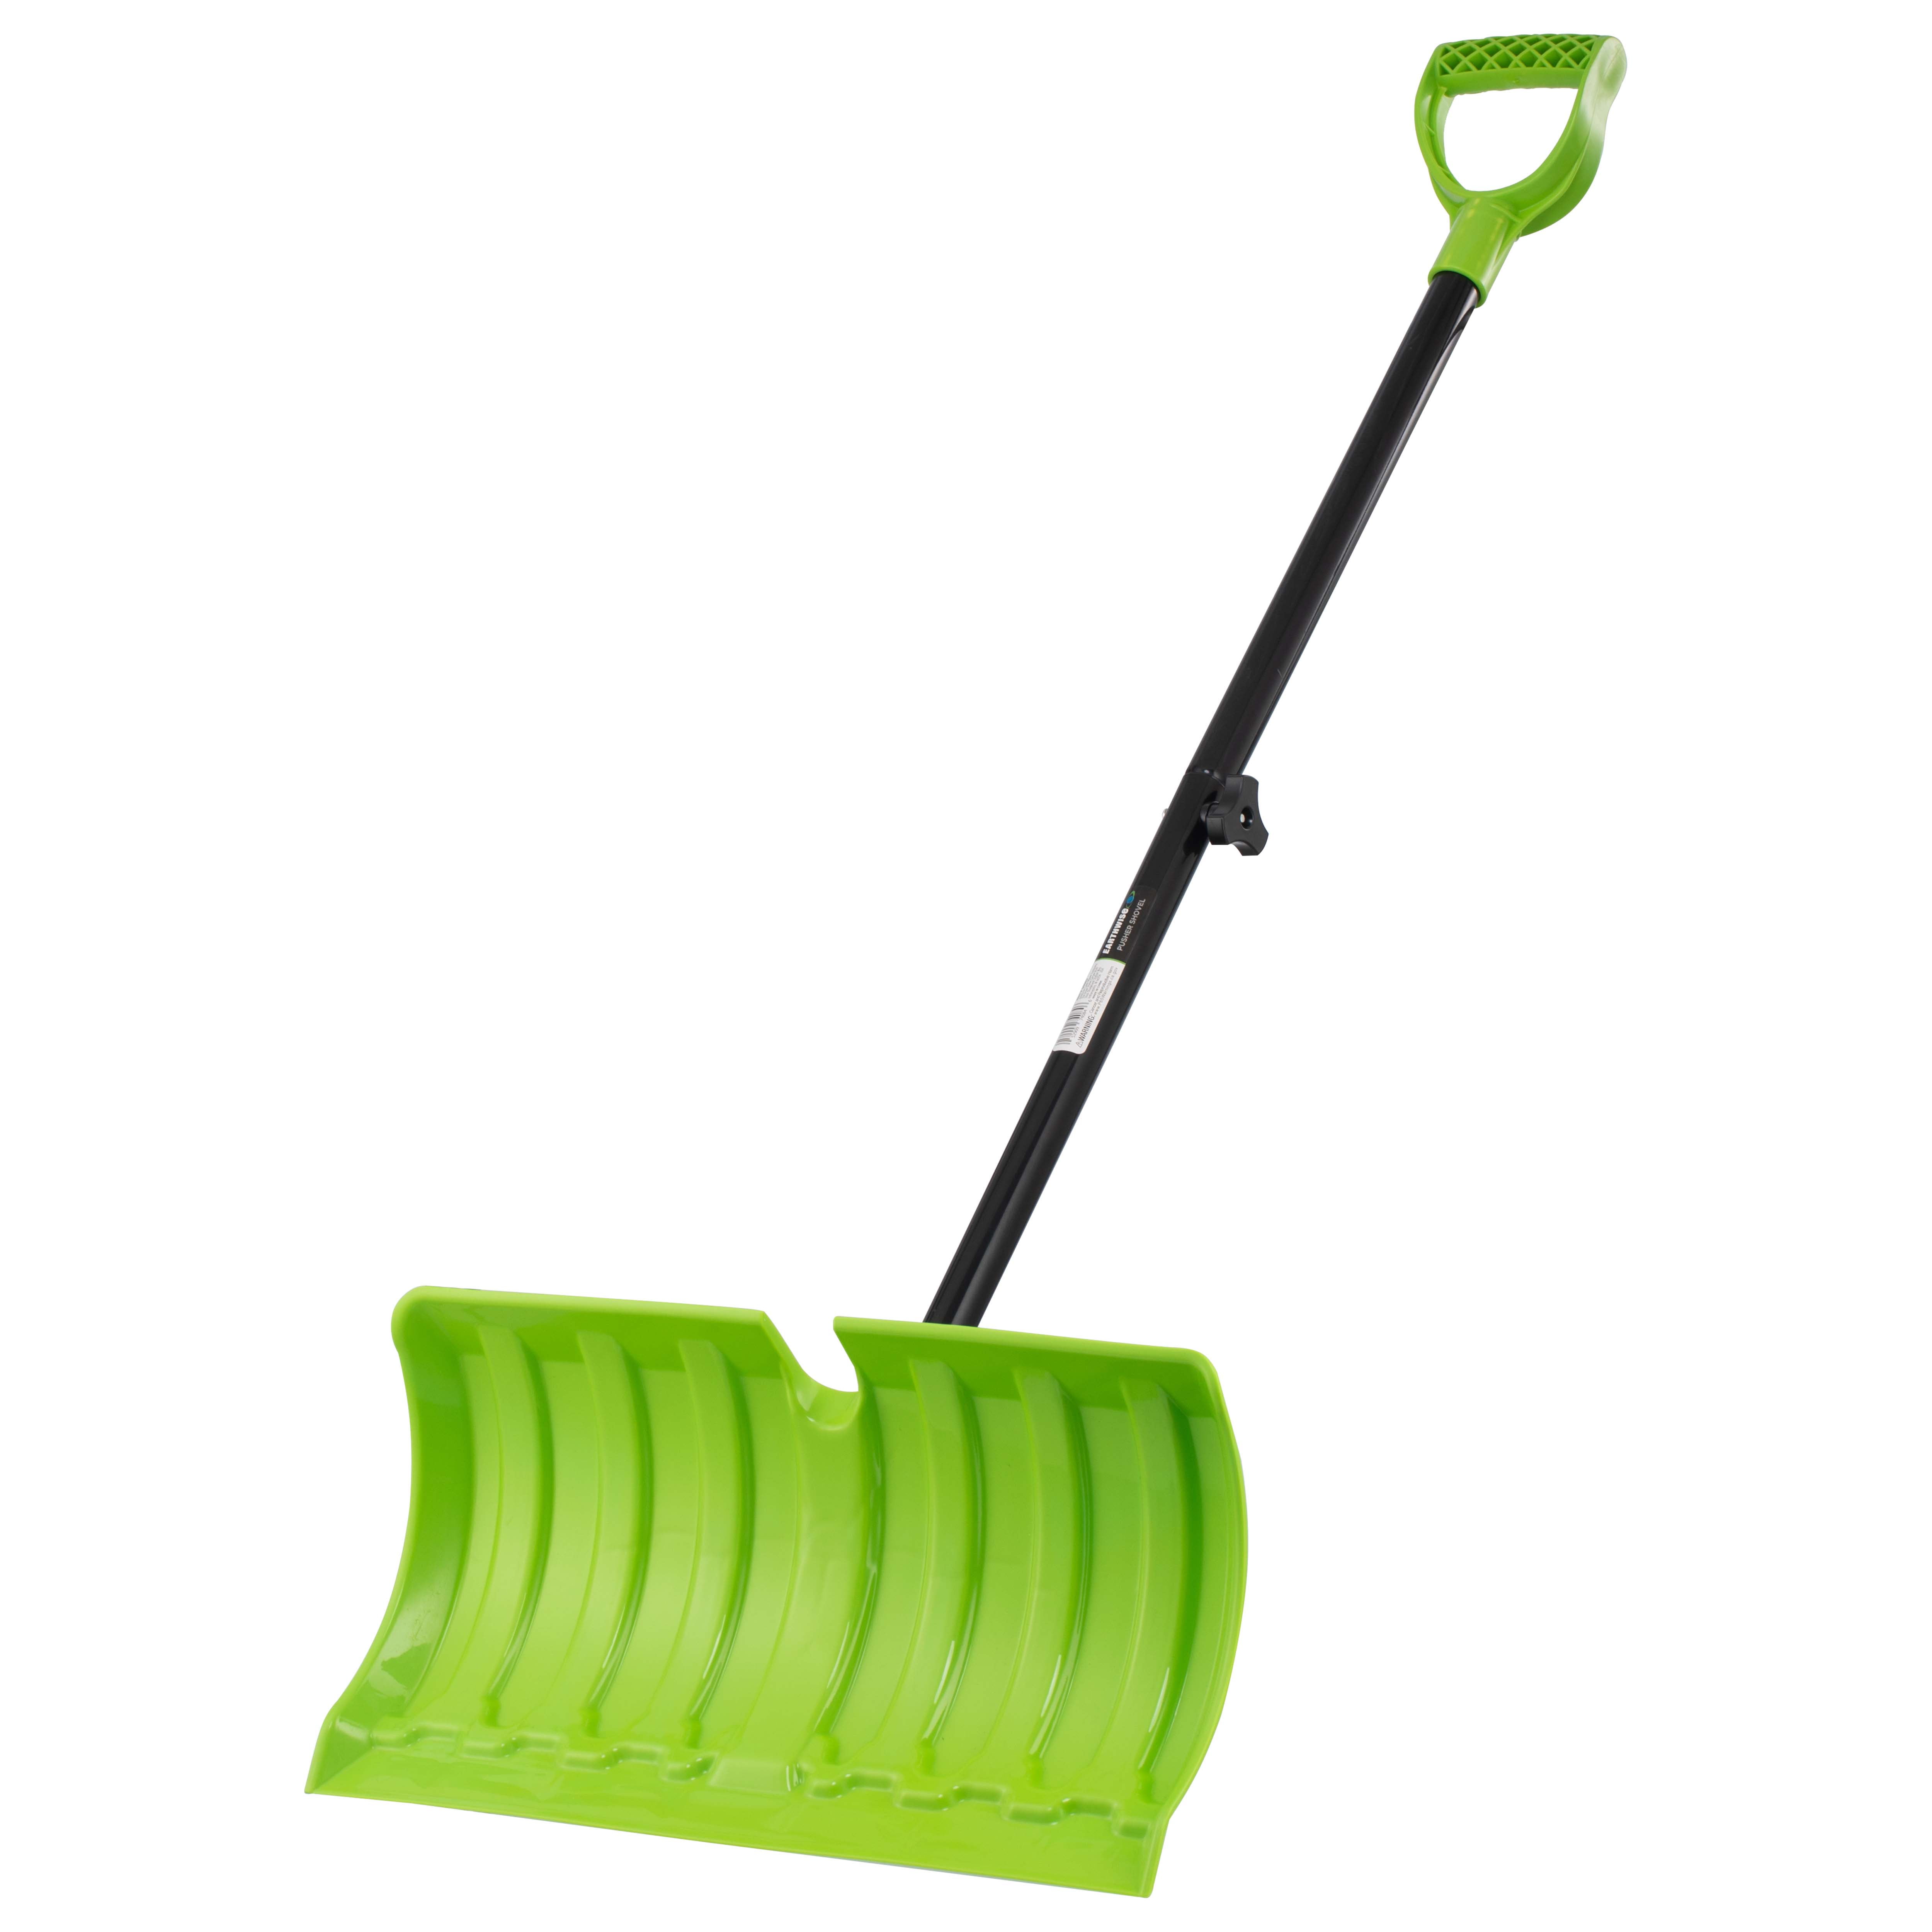 Suncast SC2700 20-Inch Snow Shovel/Pusher Combo with Wear Strip And D-Grip Handl 